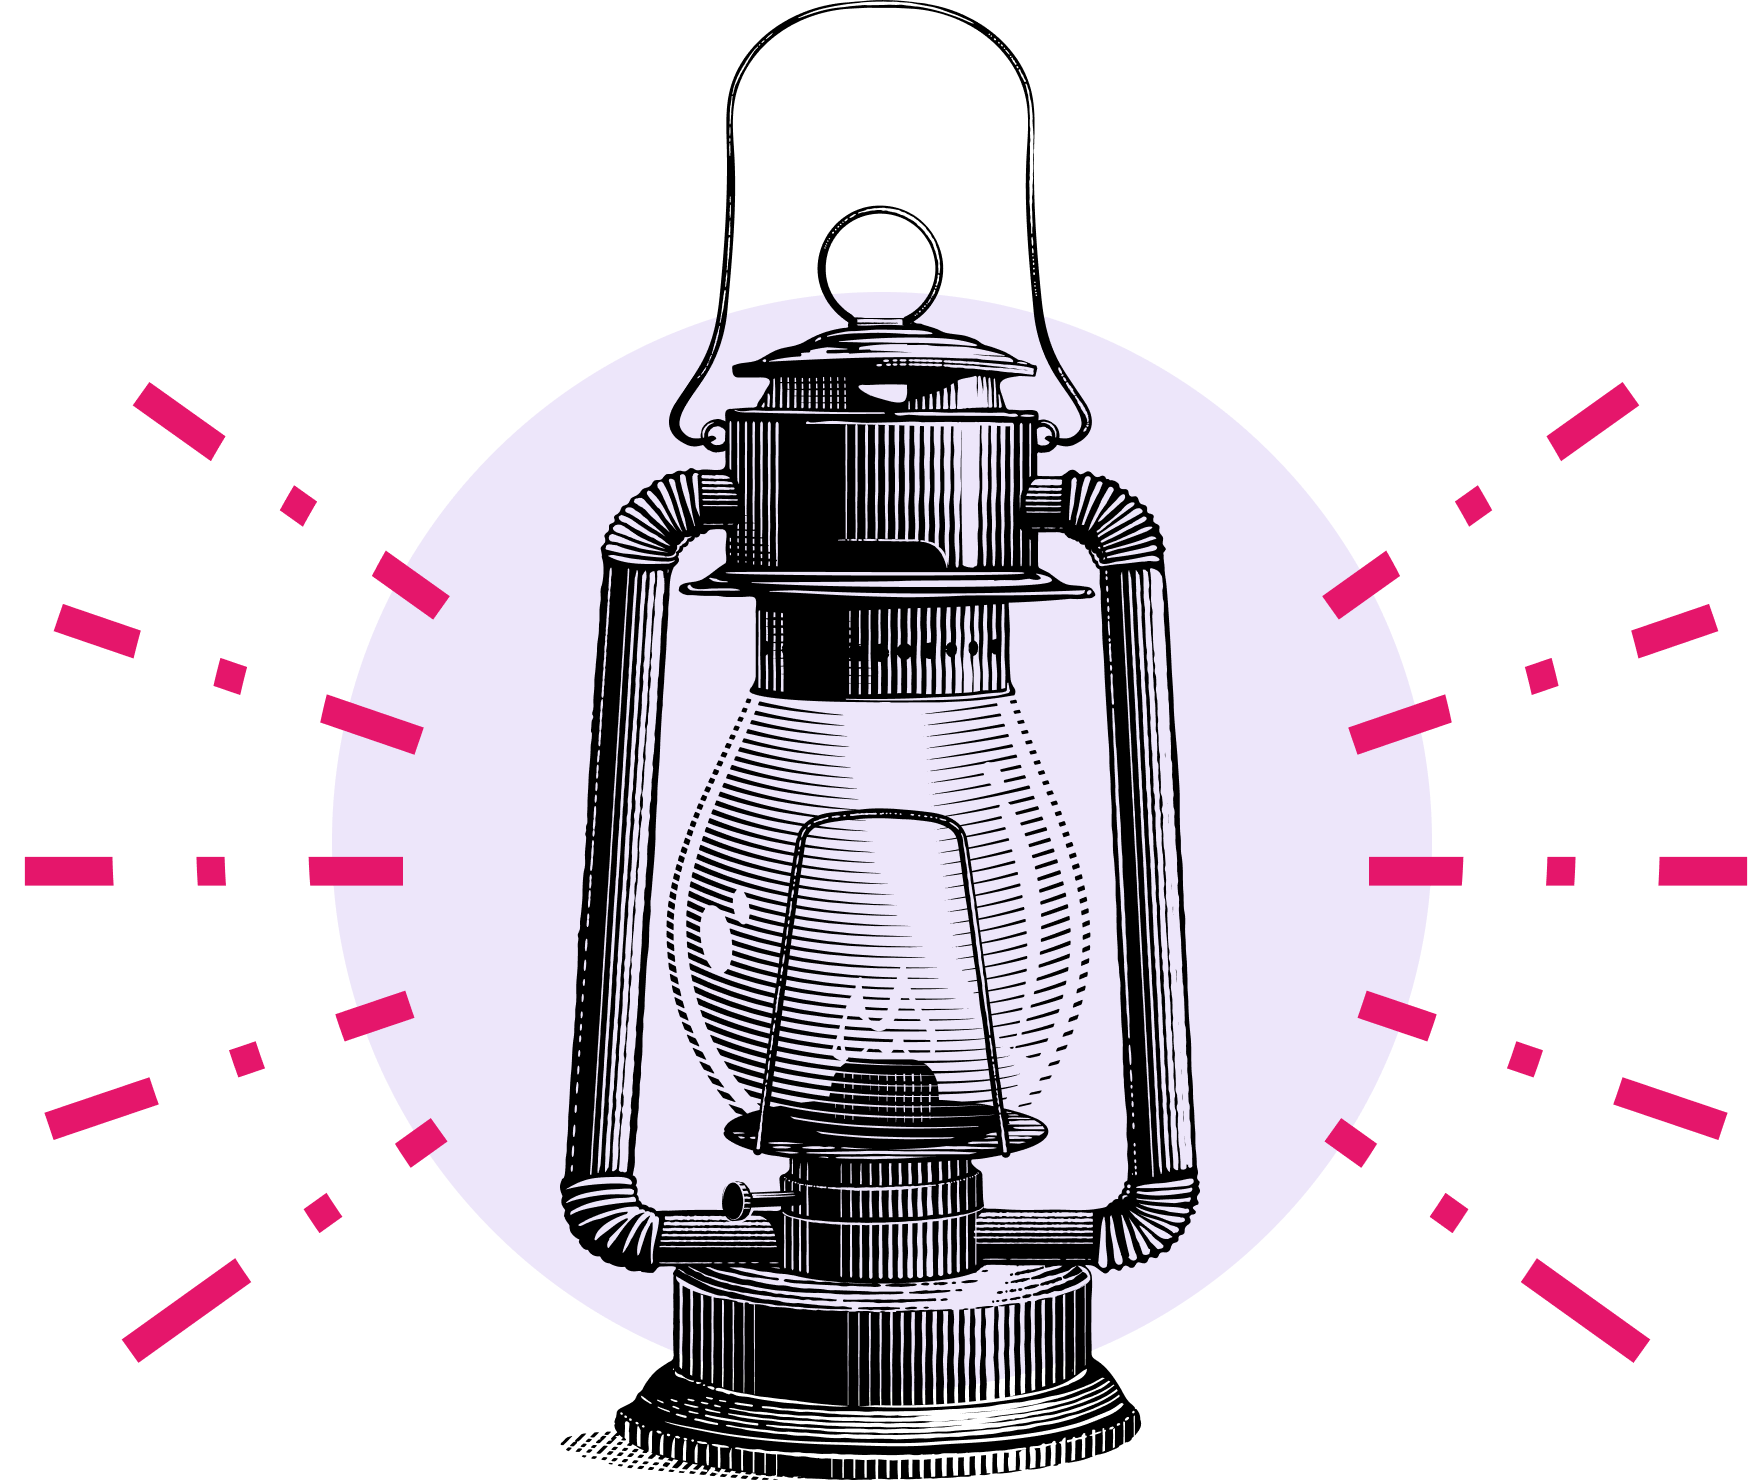 Mission and Values Lantern